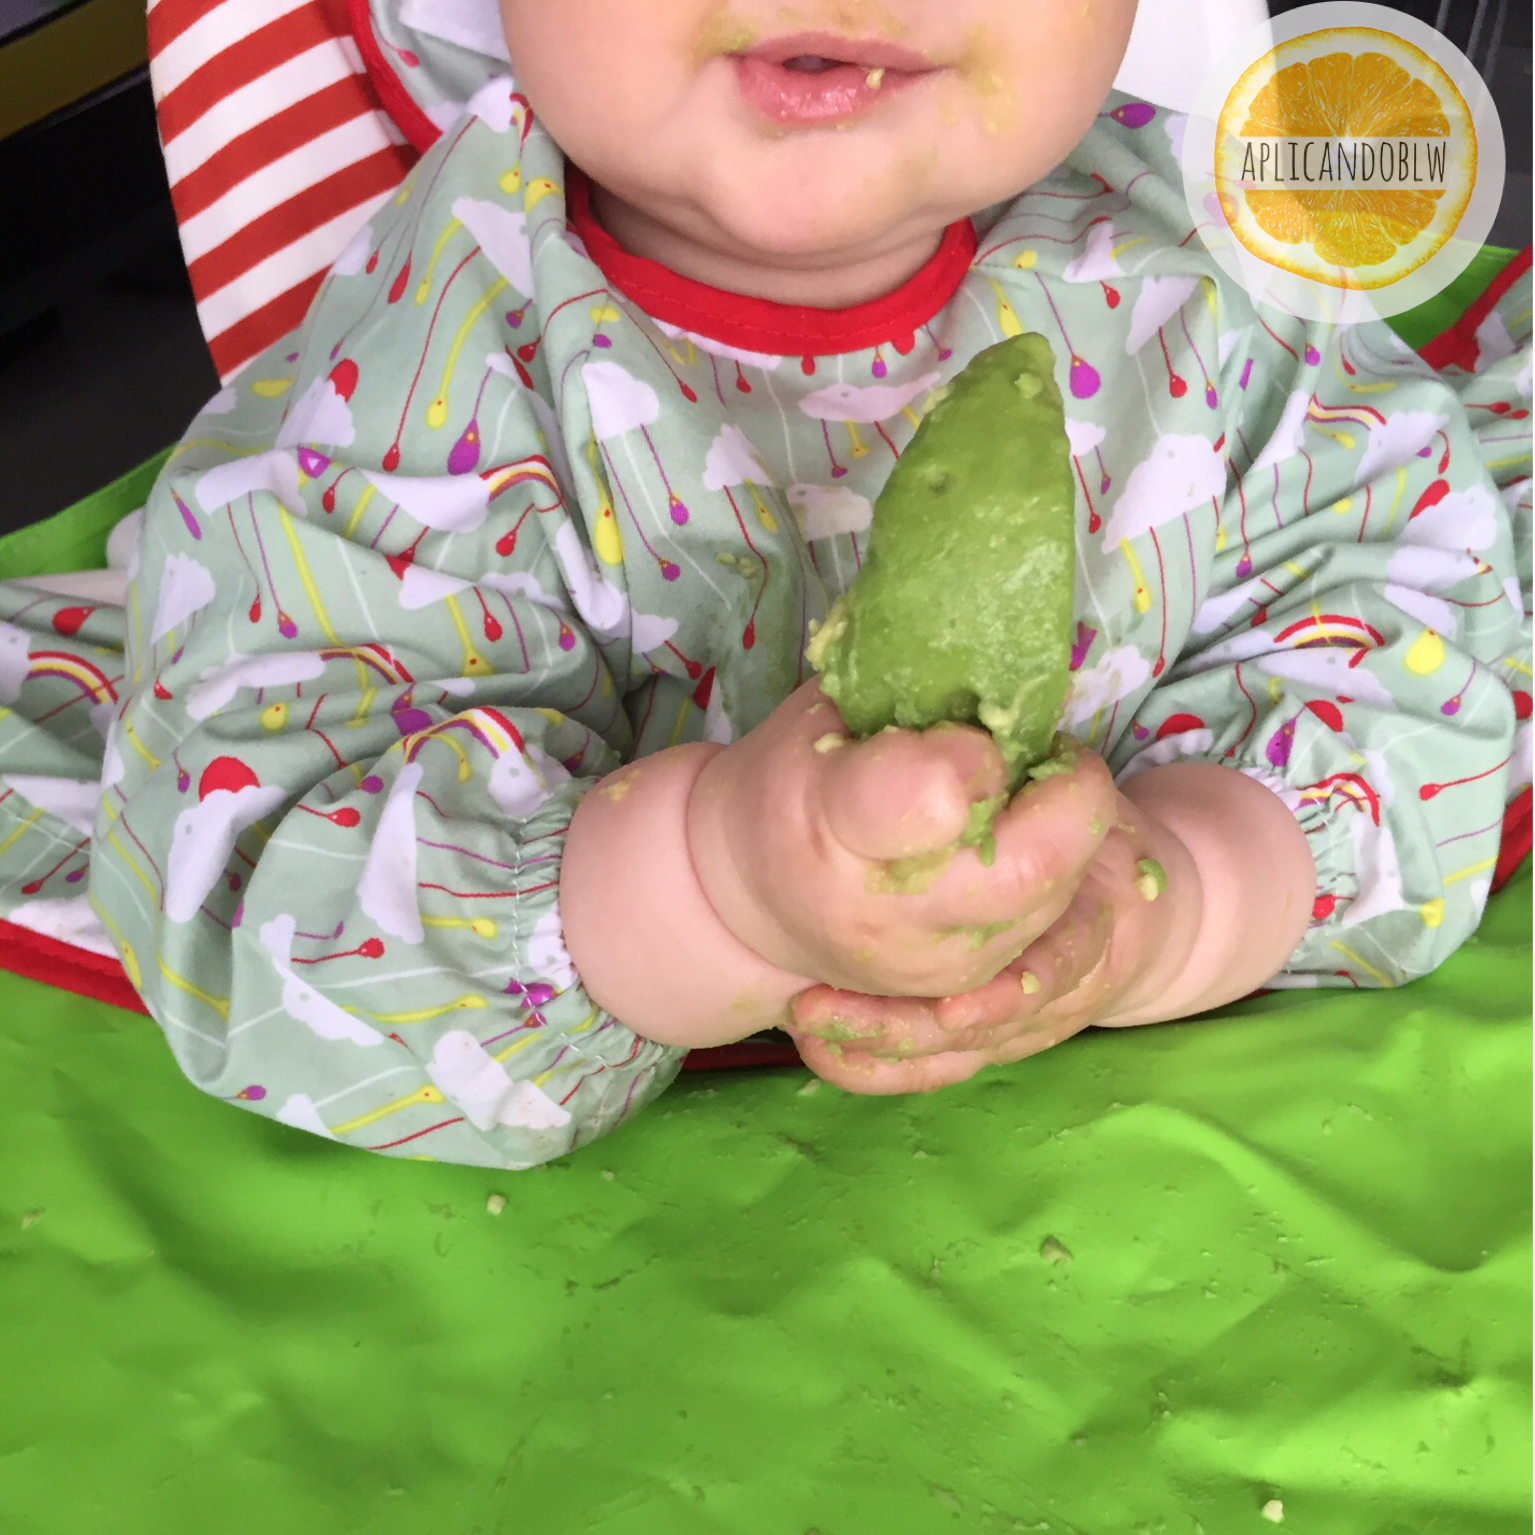 blw 6 meses - baby led weaning aguacate